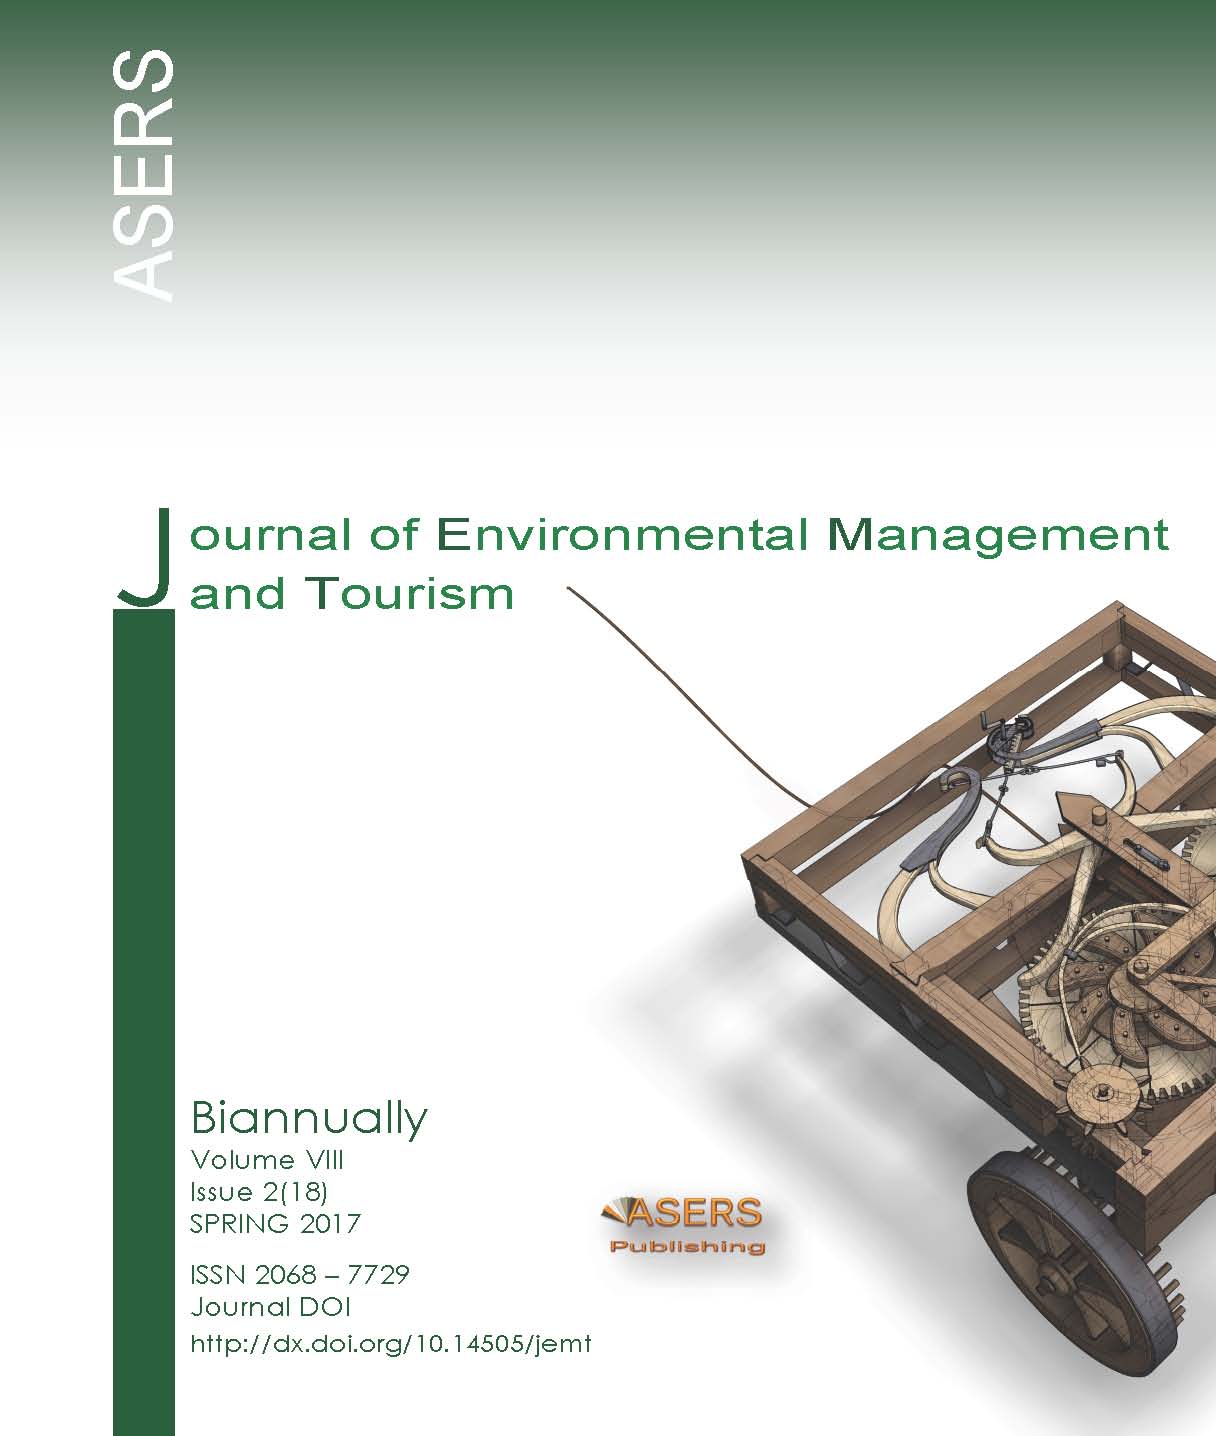 Methods of Assessing the Competitive Environment of Public Food Service Establishments in the Context of Providing their Sustainable Development